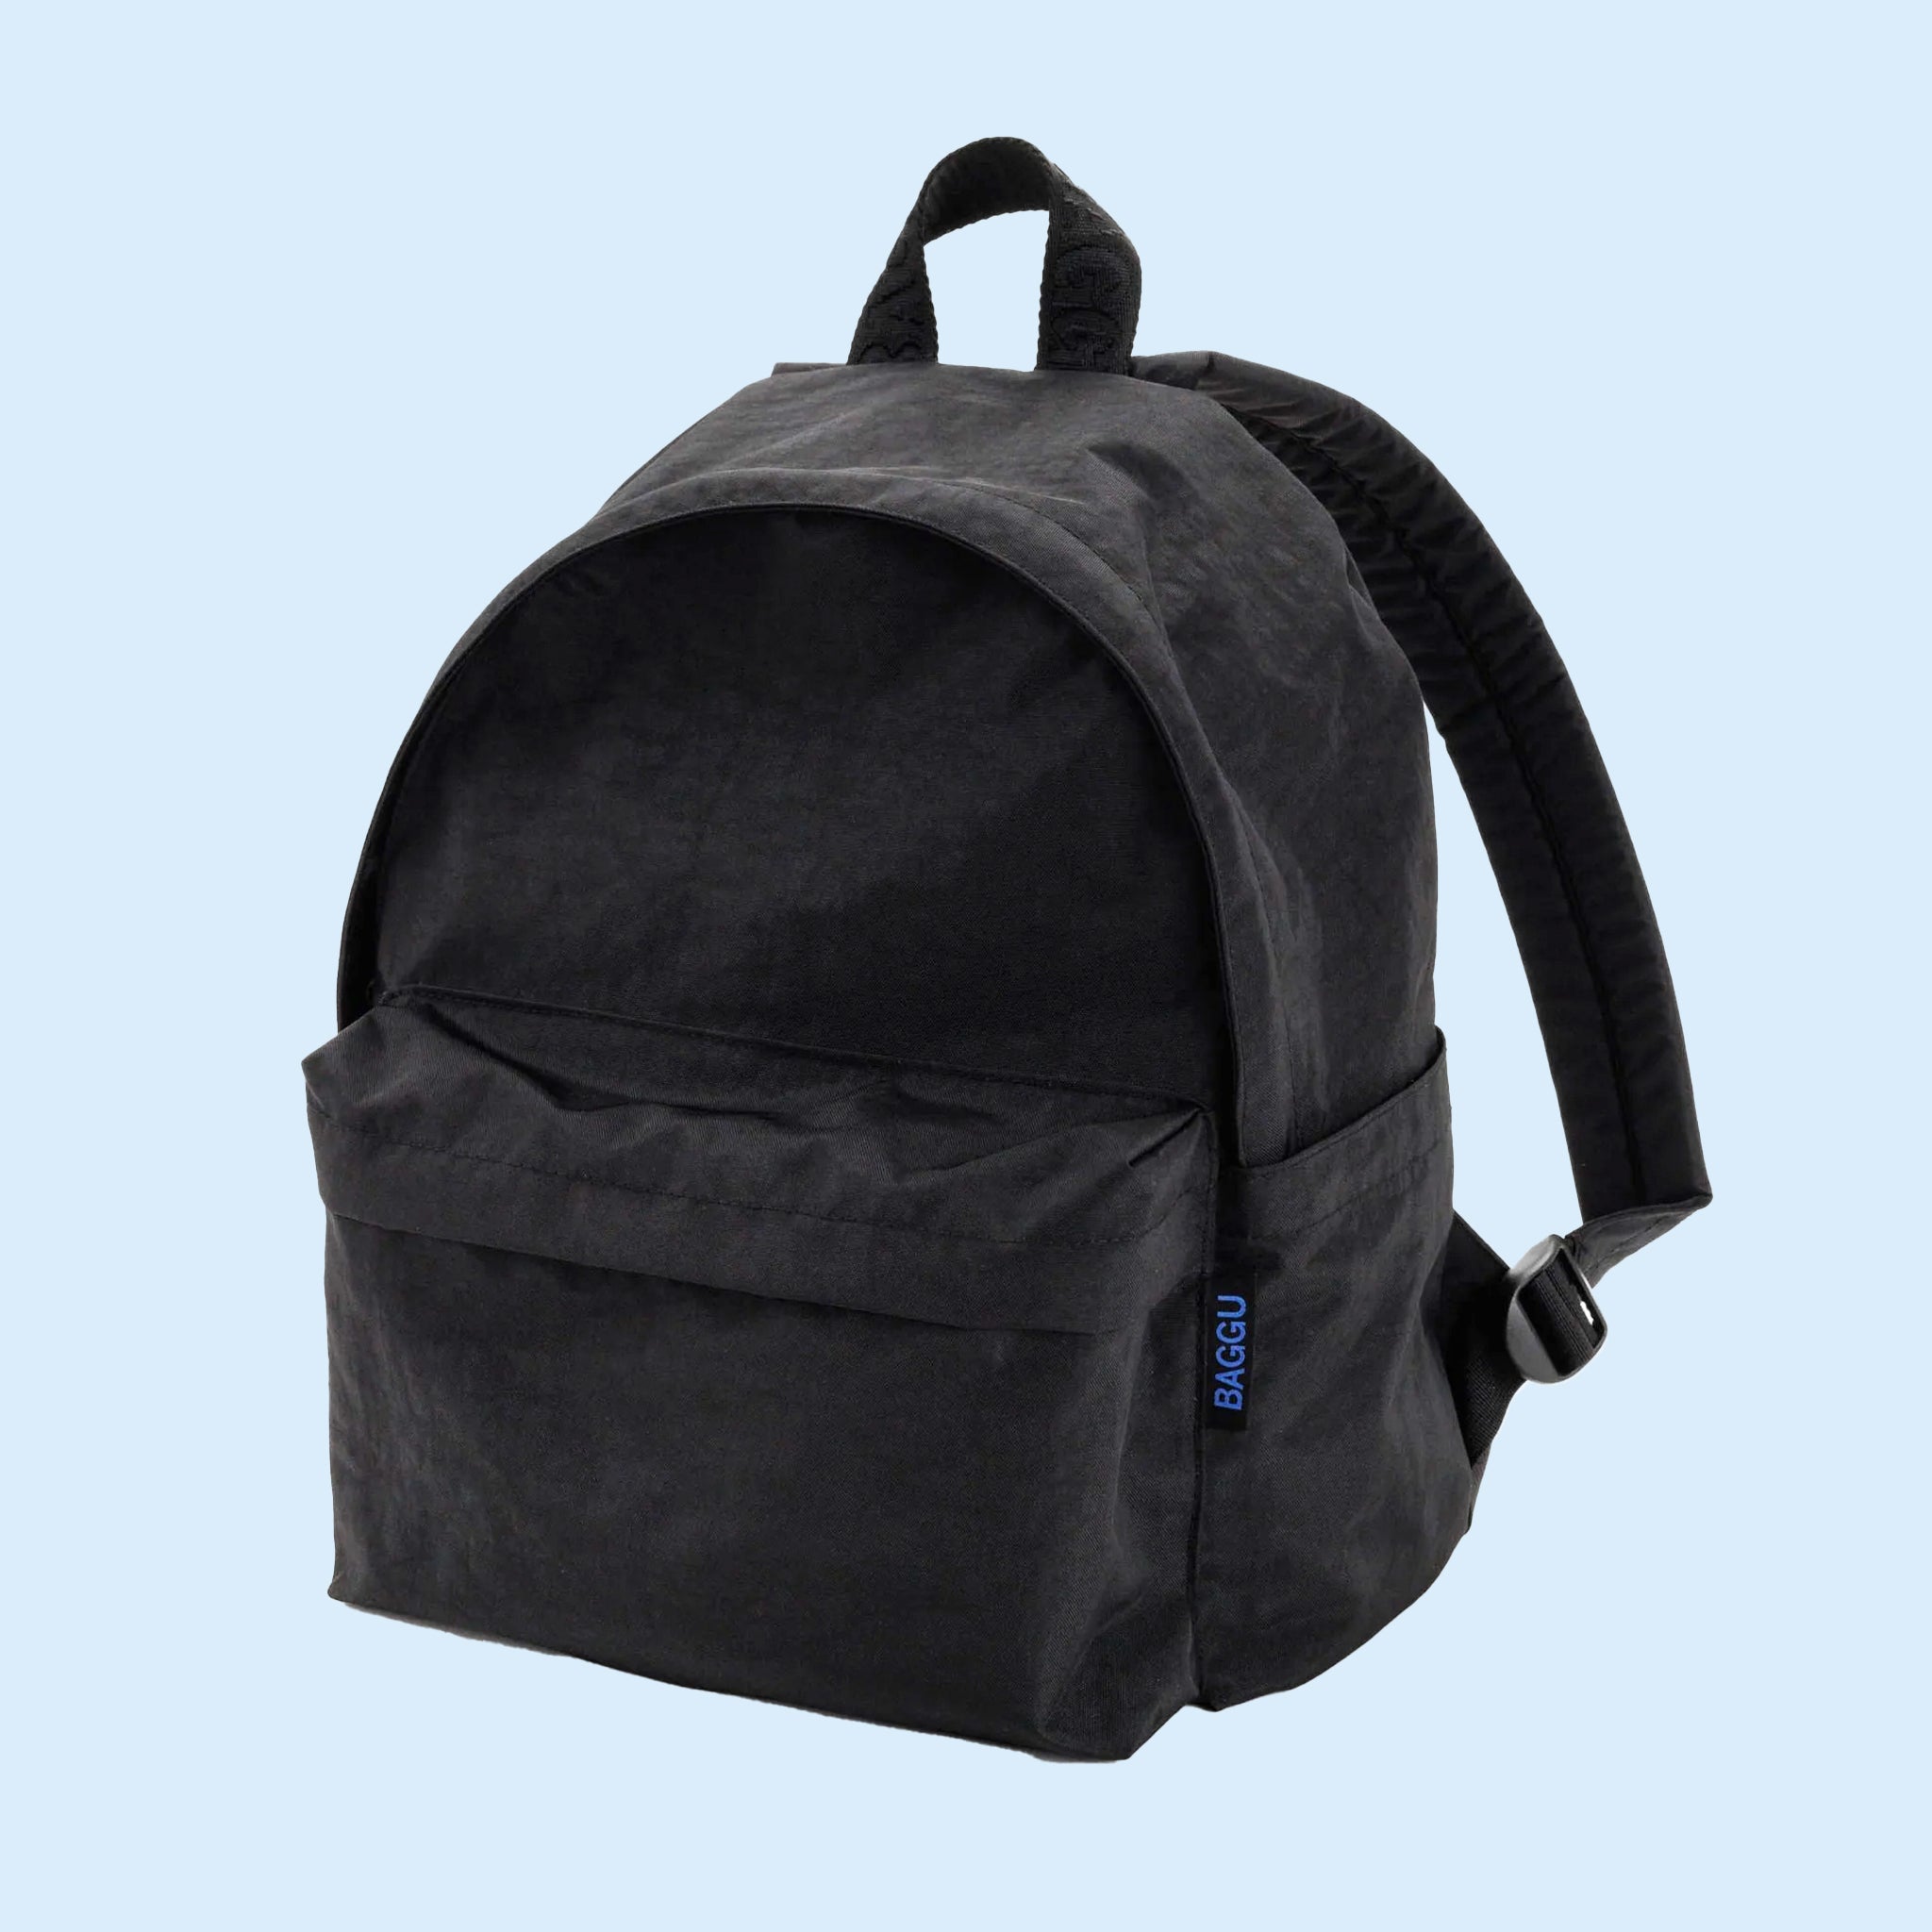 A black nylon backpack with two front zipper compartments and side pockets. 